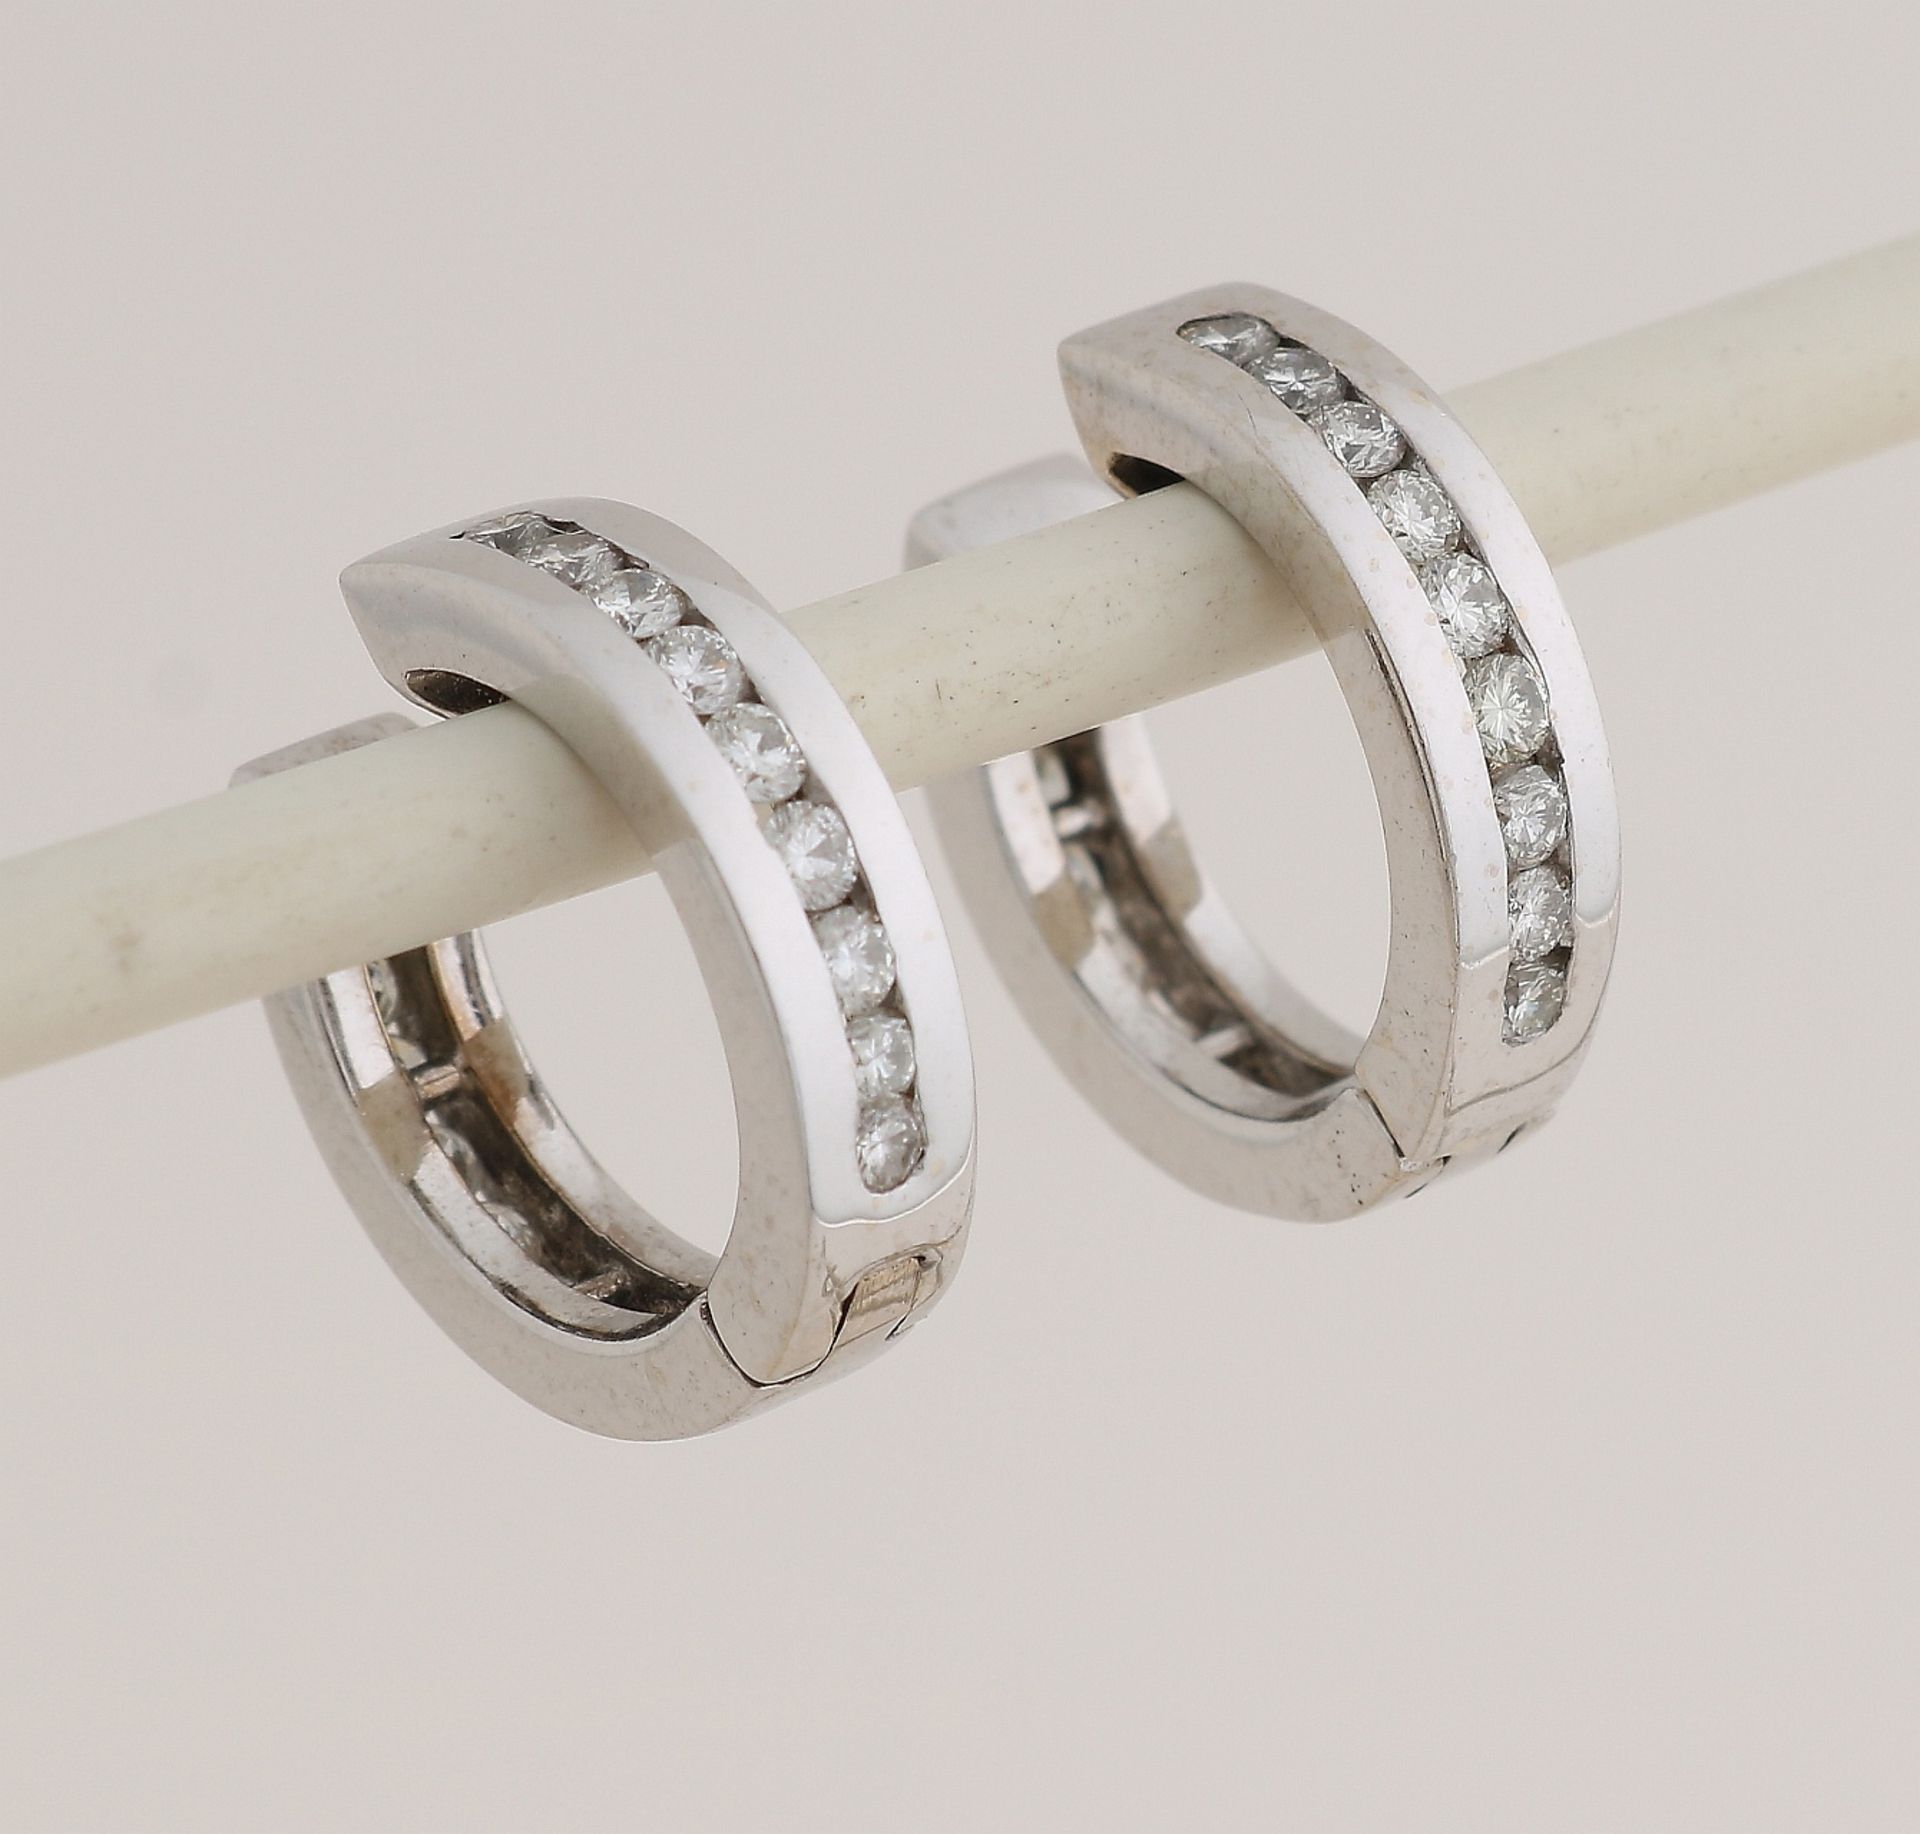 White gold creoles with diamonds.